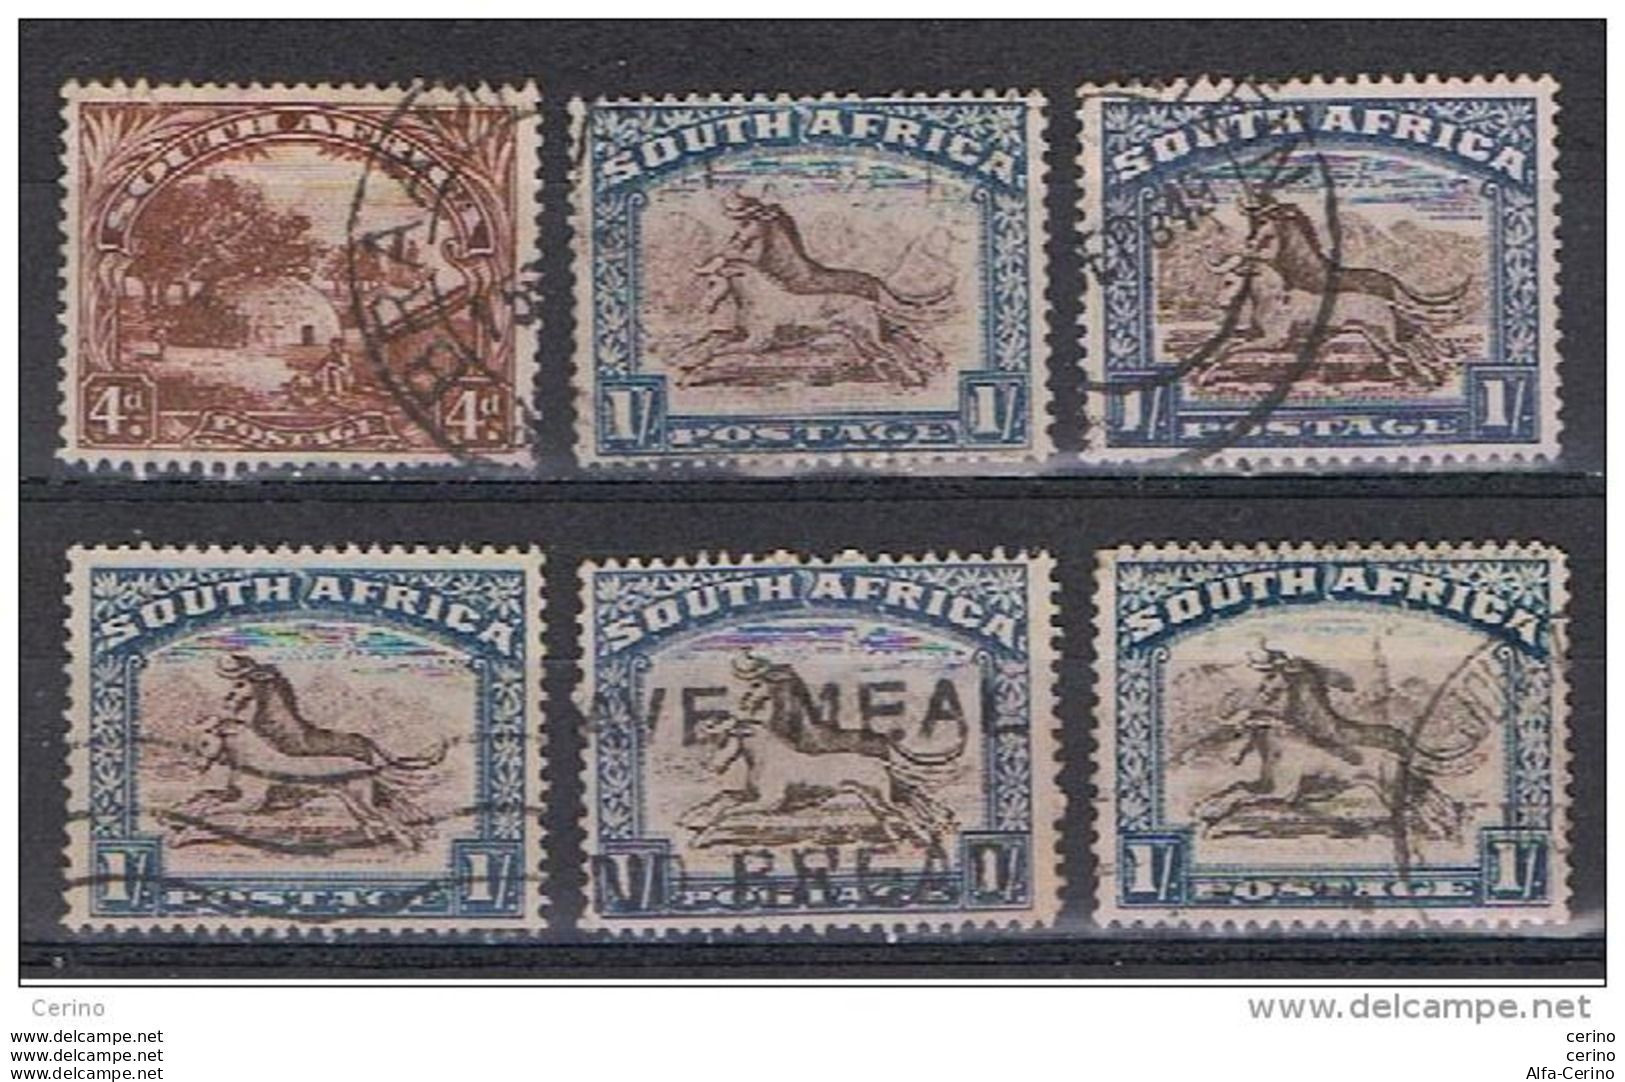 SOUTH   AFRICA:  1927/28  ORDINARY  SERIES  -  LOT  6  USED  STAMPS  -  YV/TELL. 26 + 27x5 - Oblitérés